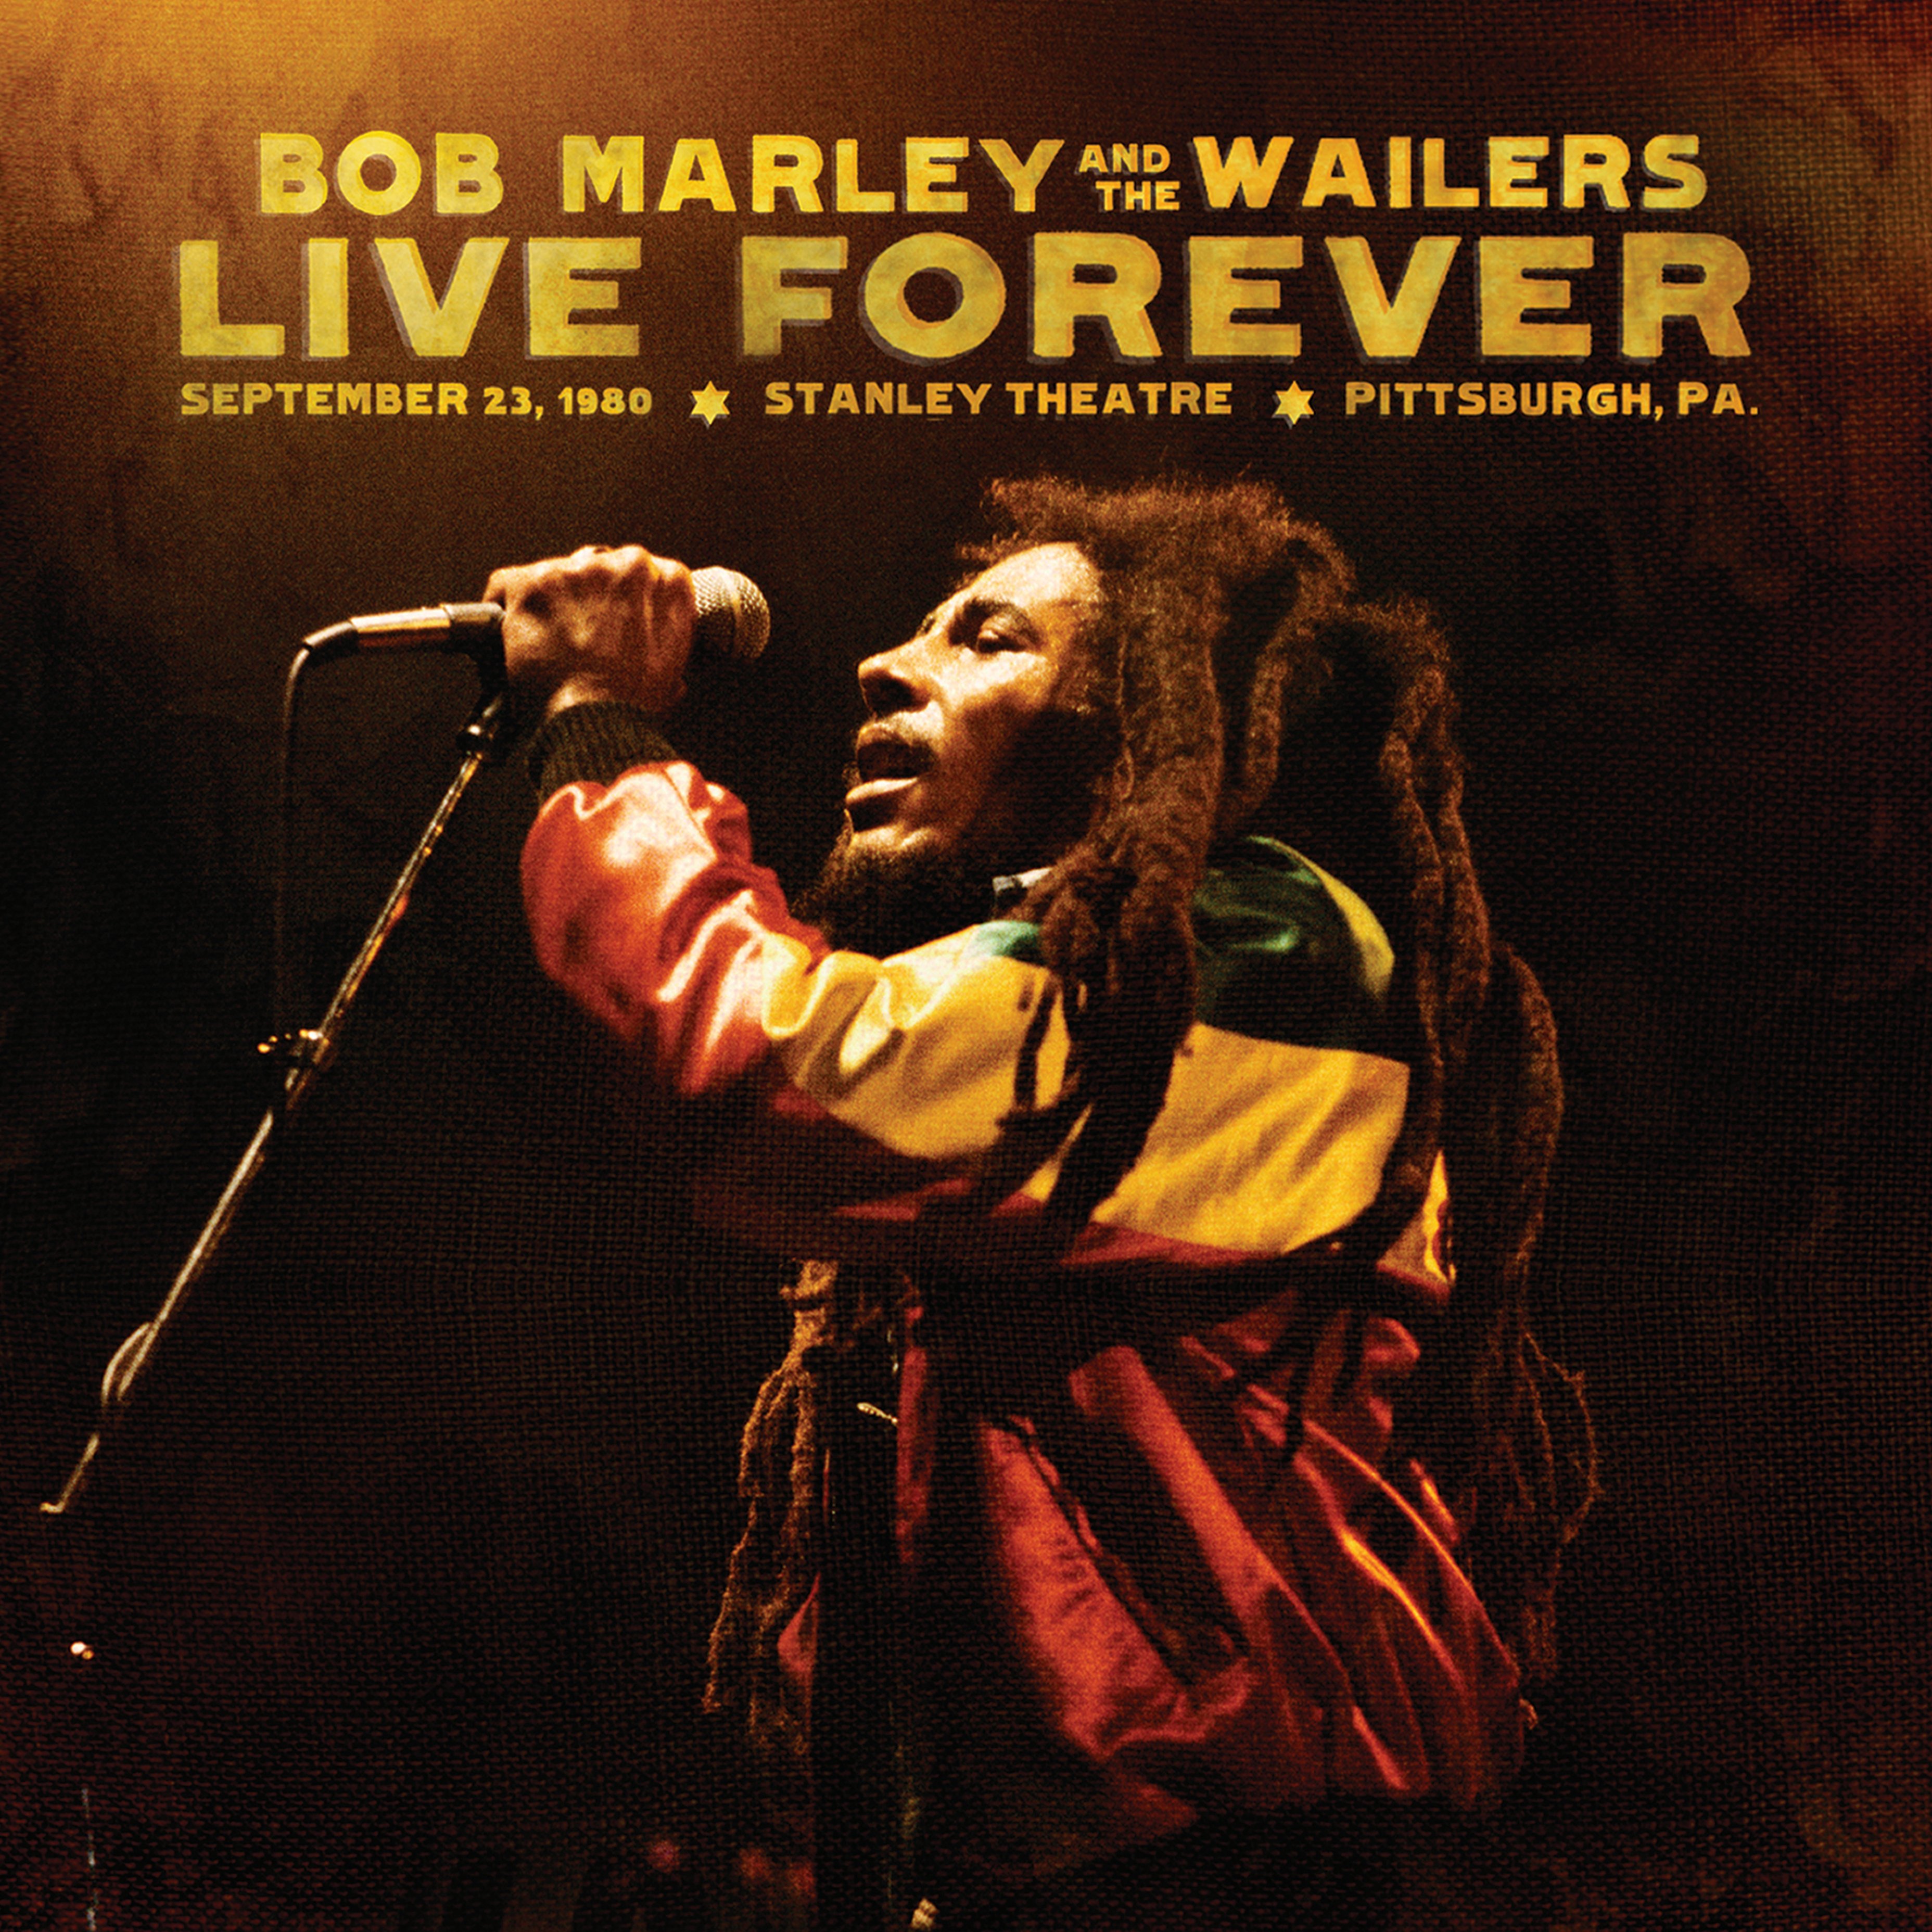 LIVE FOREVER: STANLEY THEATRE PITTSBURGH PA SEPTEM